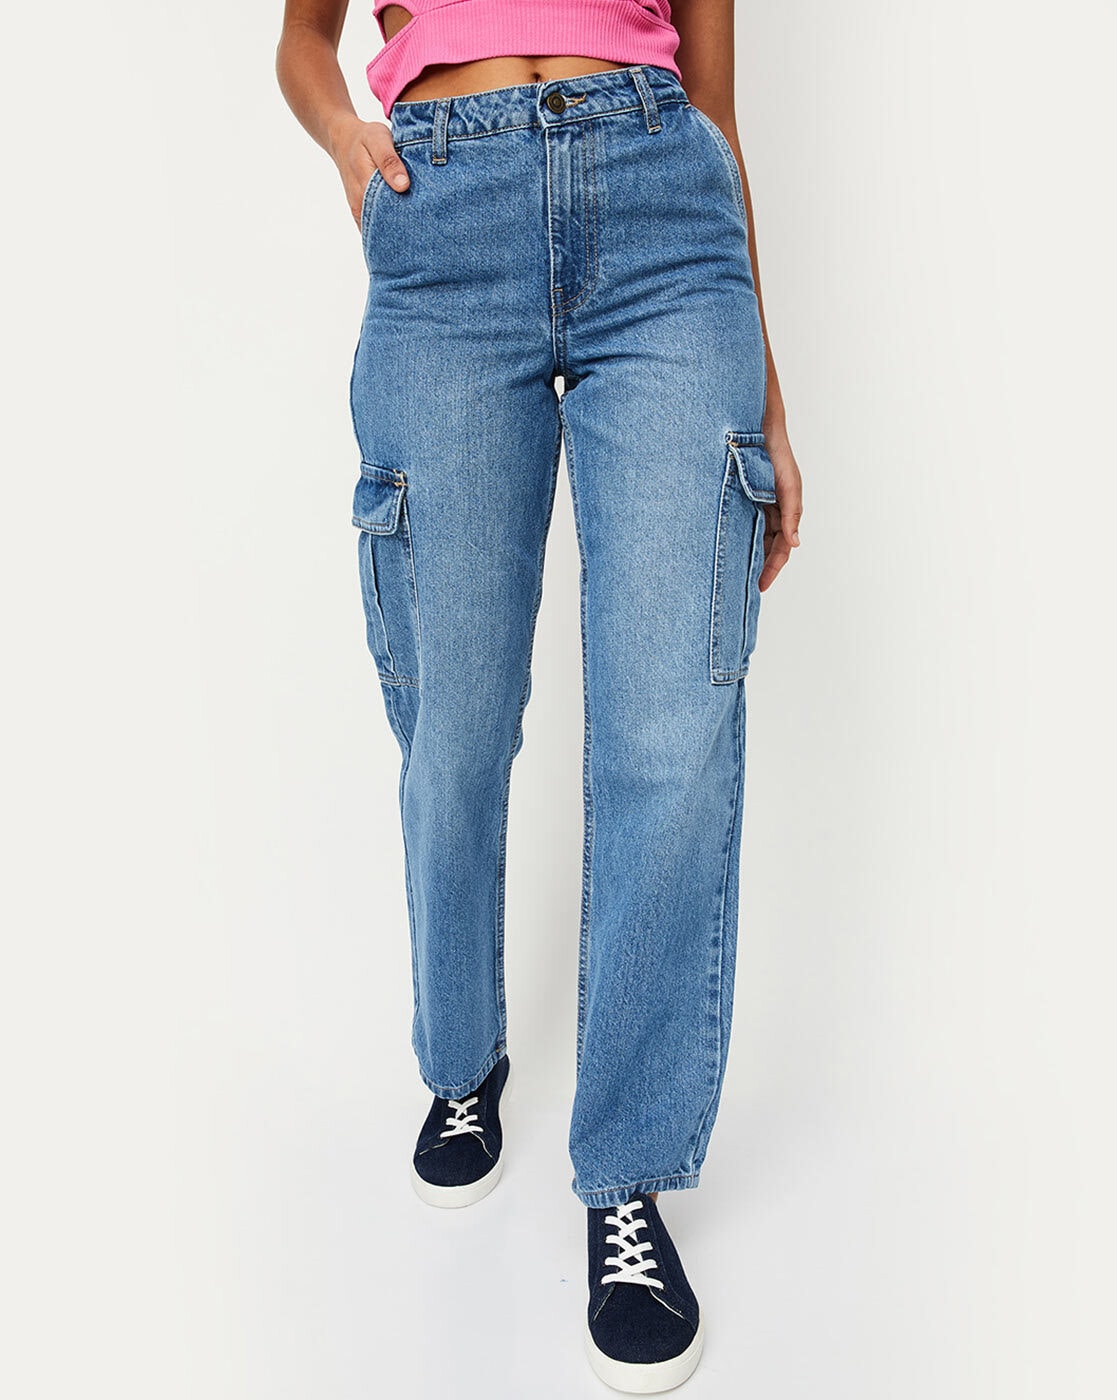 WOMEN LATEST STRAIGHT FIT WIDE LEG CARGO TROUSERS BY SKT| SOLID HIGH-RISE  CARGO JEANS | 6 POCKET WIDE LEG DENIMS | 80'S ROCKER-CHIC INSPIRED CARGO  PANTS | SIT ABOVE | NON-STRETCH FIT